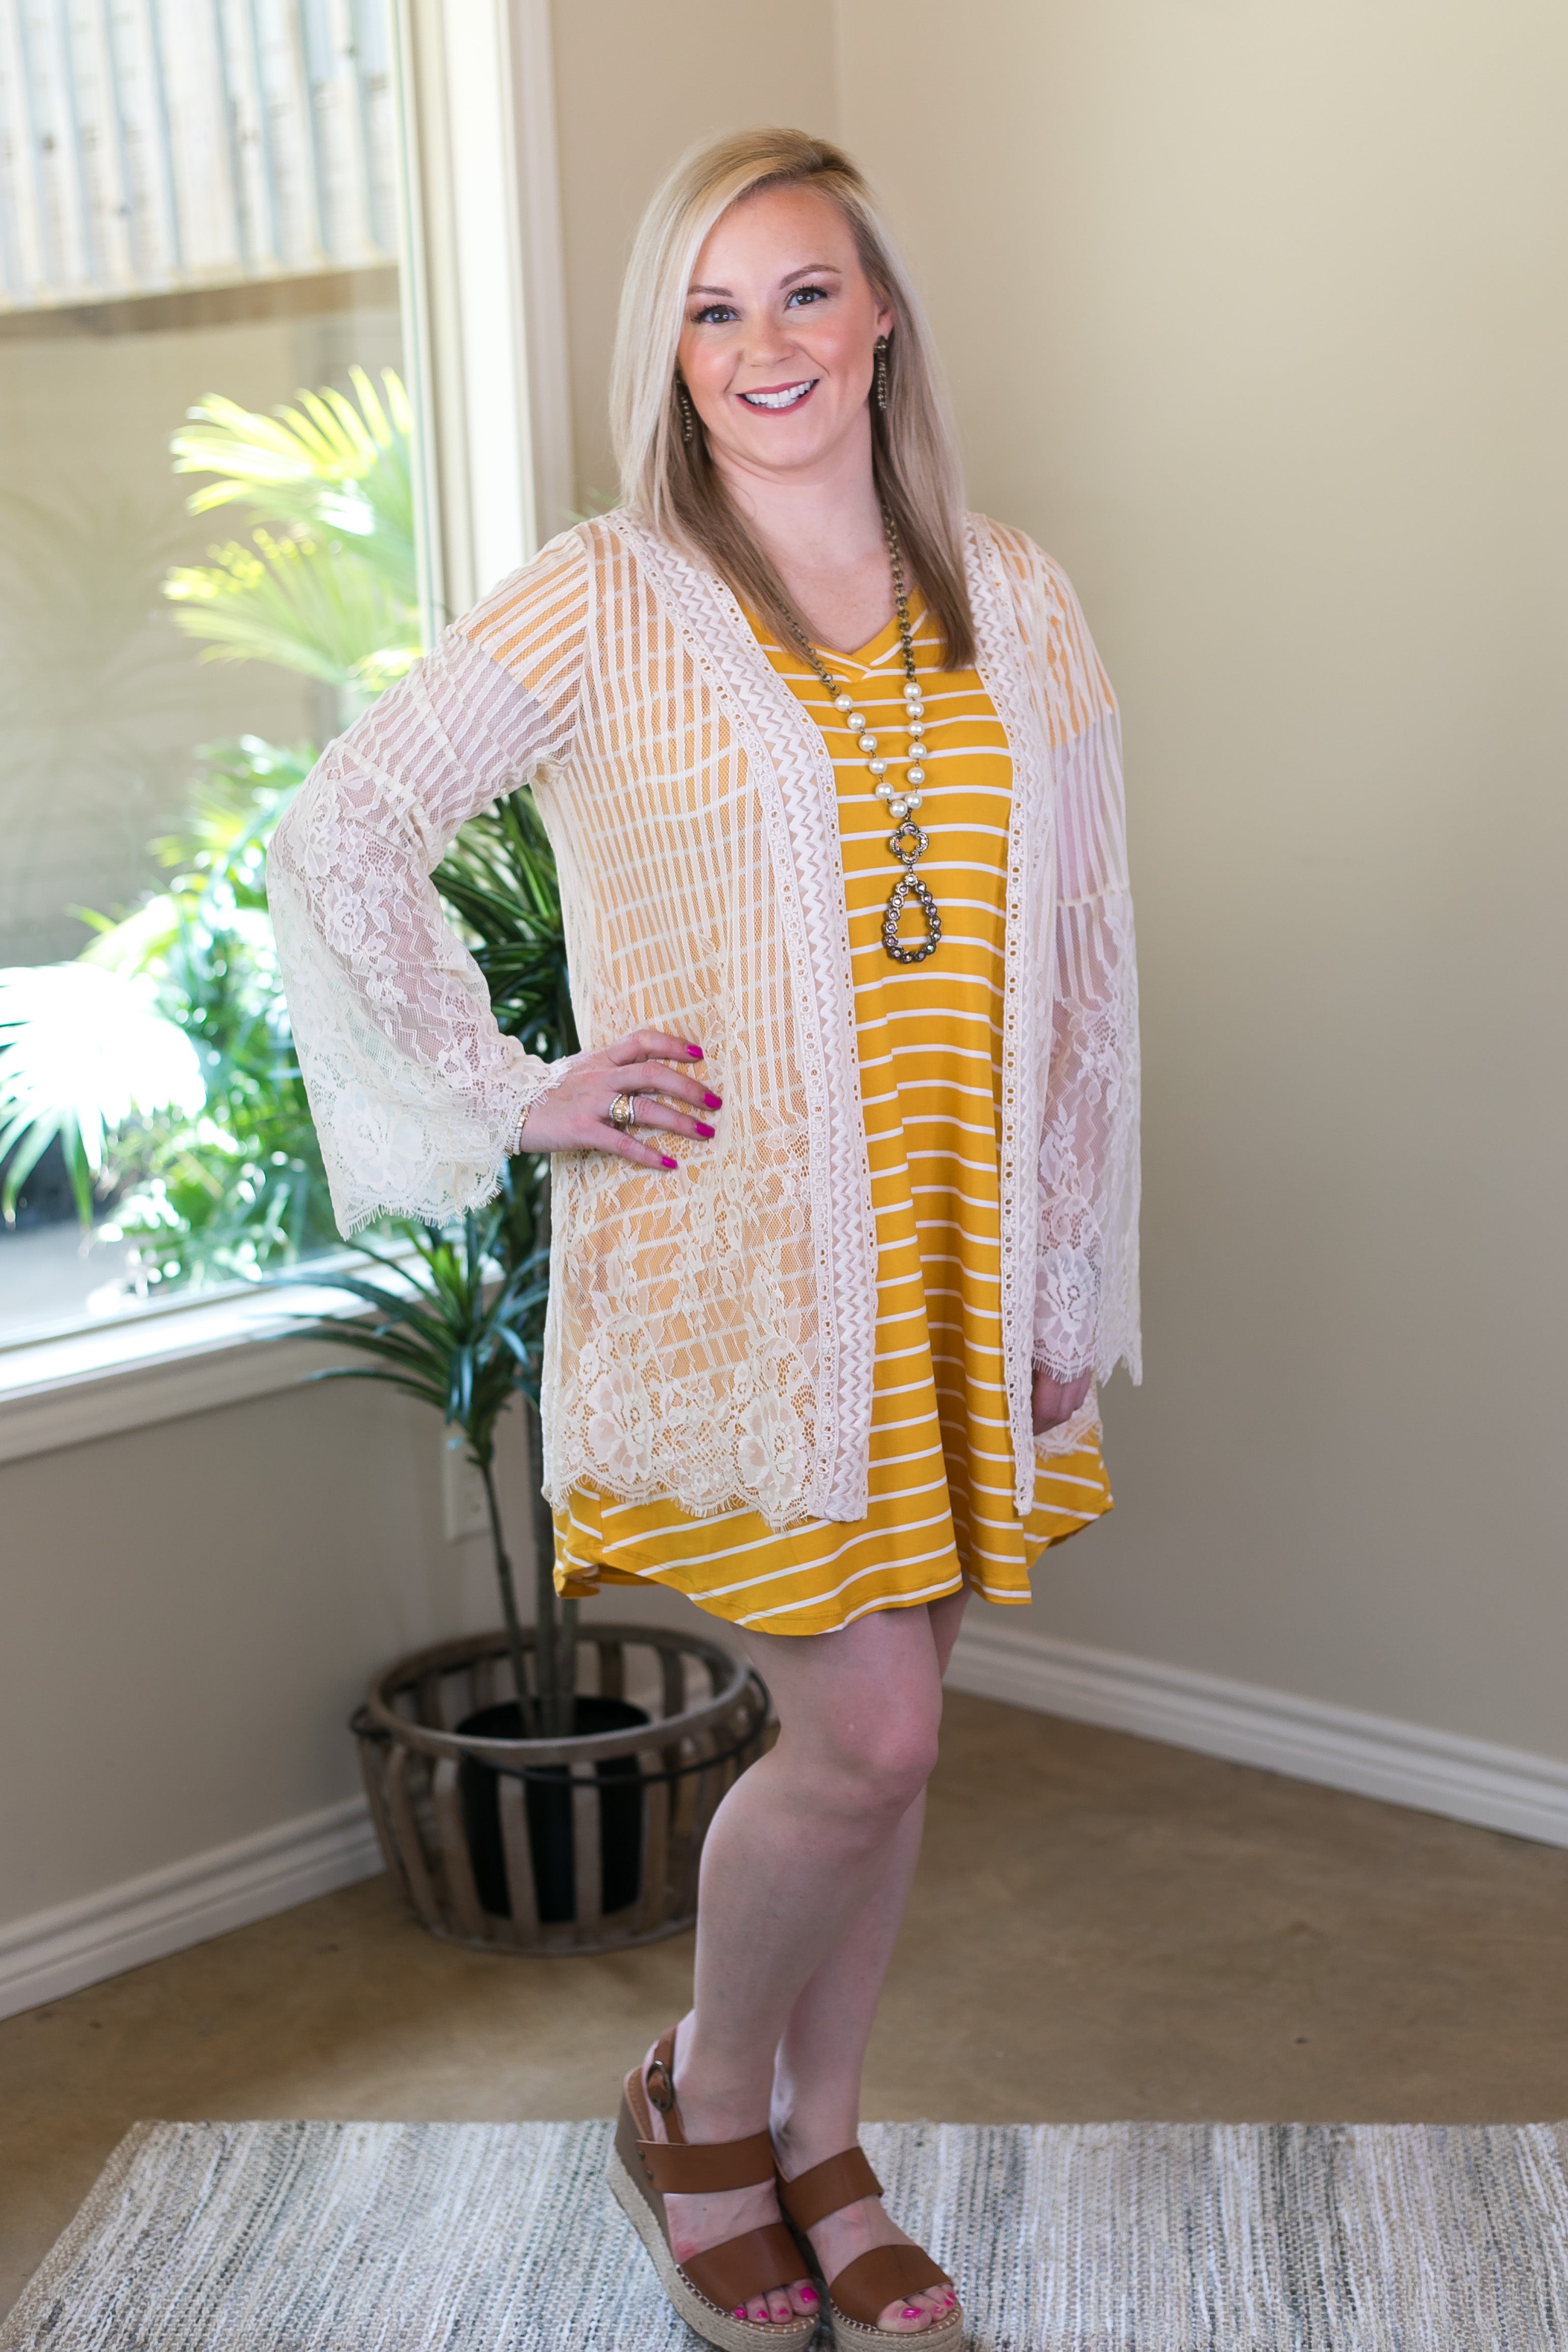 Last Chance Size Small | Beyond Reason Stripe Tee Shirt Dress in Mustard Yellow - Giddy Up Glamour Boutique